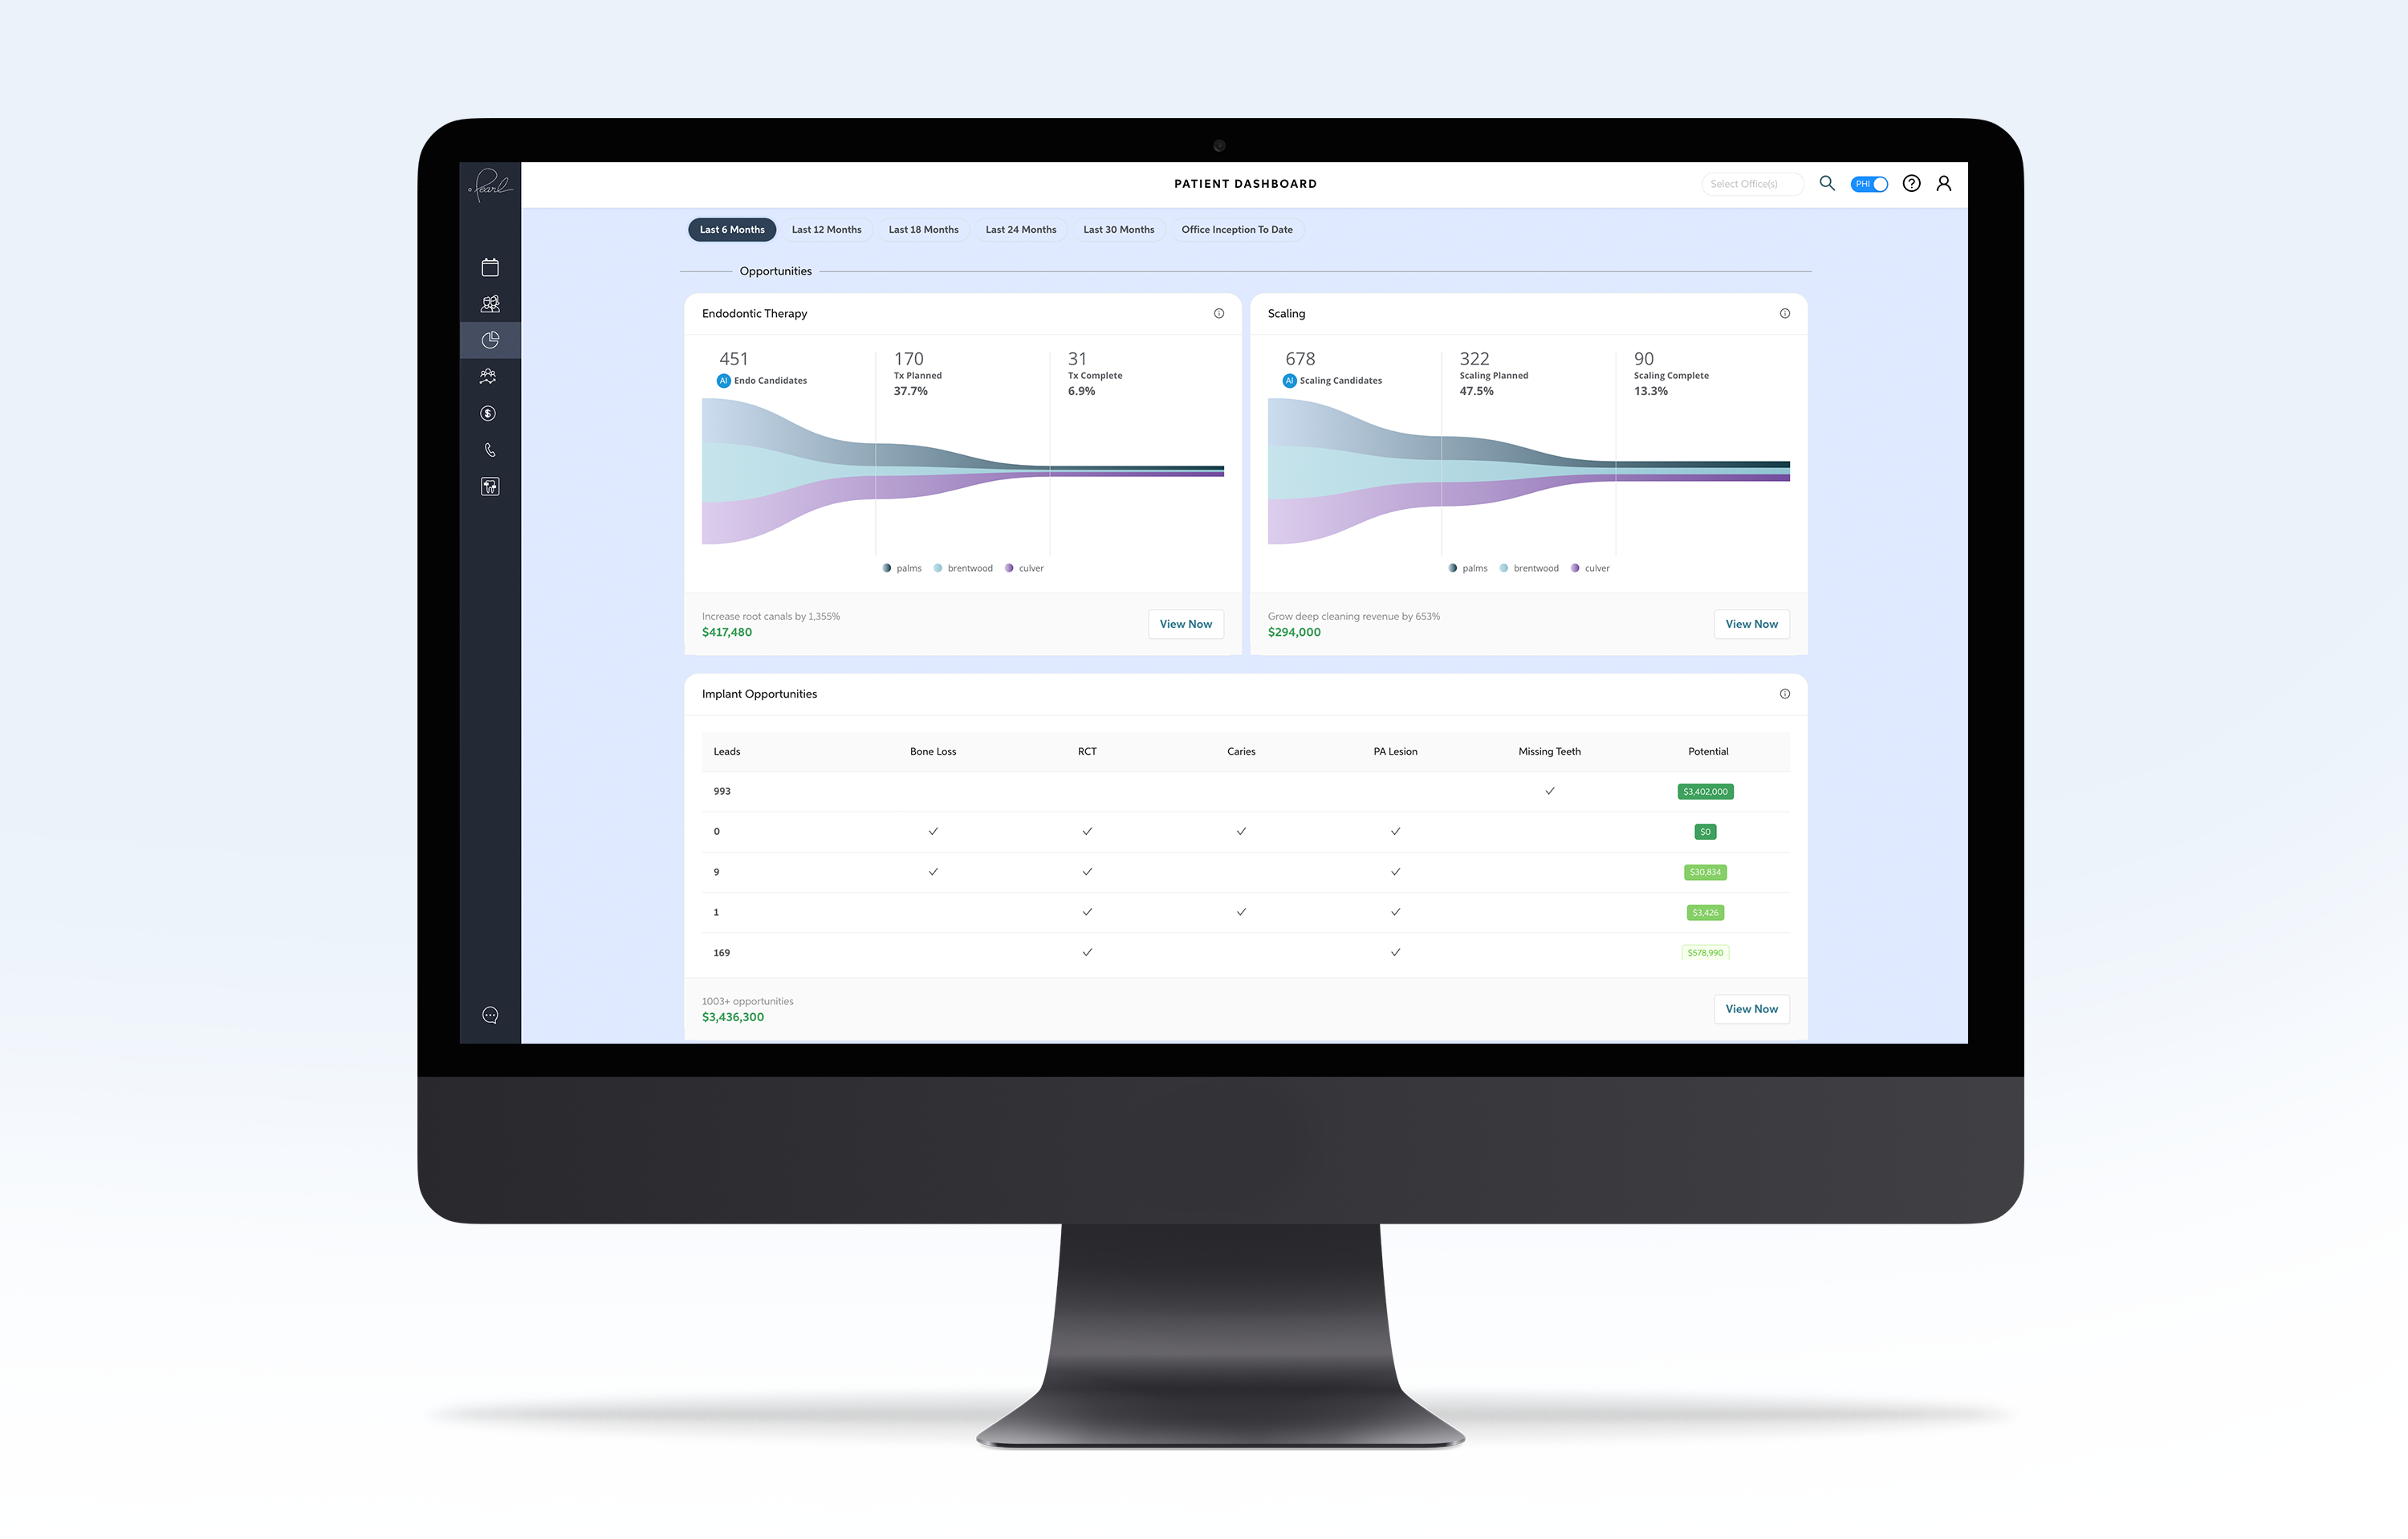 Pearl's Practice Intelligence dental AI platform offers intuitive performance analysis and clinical insight dashboards for analyzing the health of your practice.